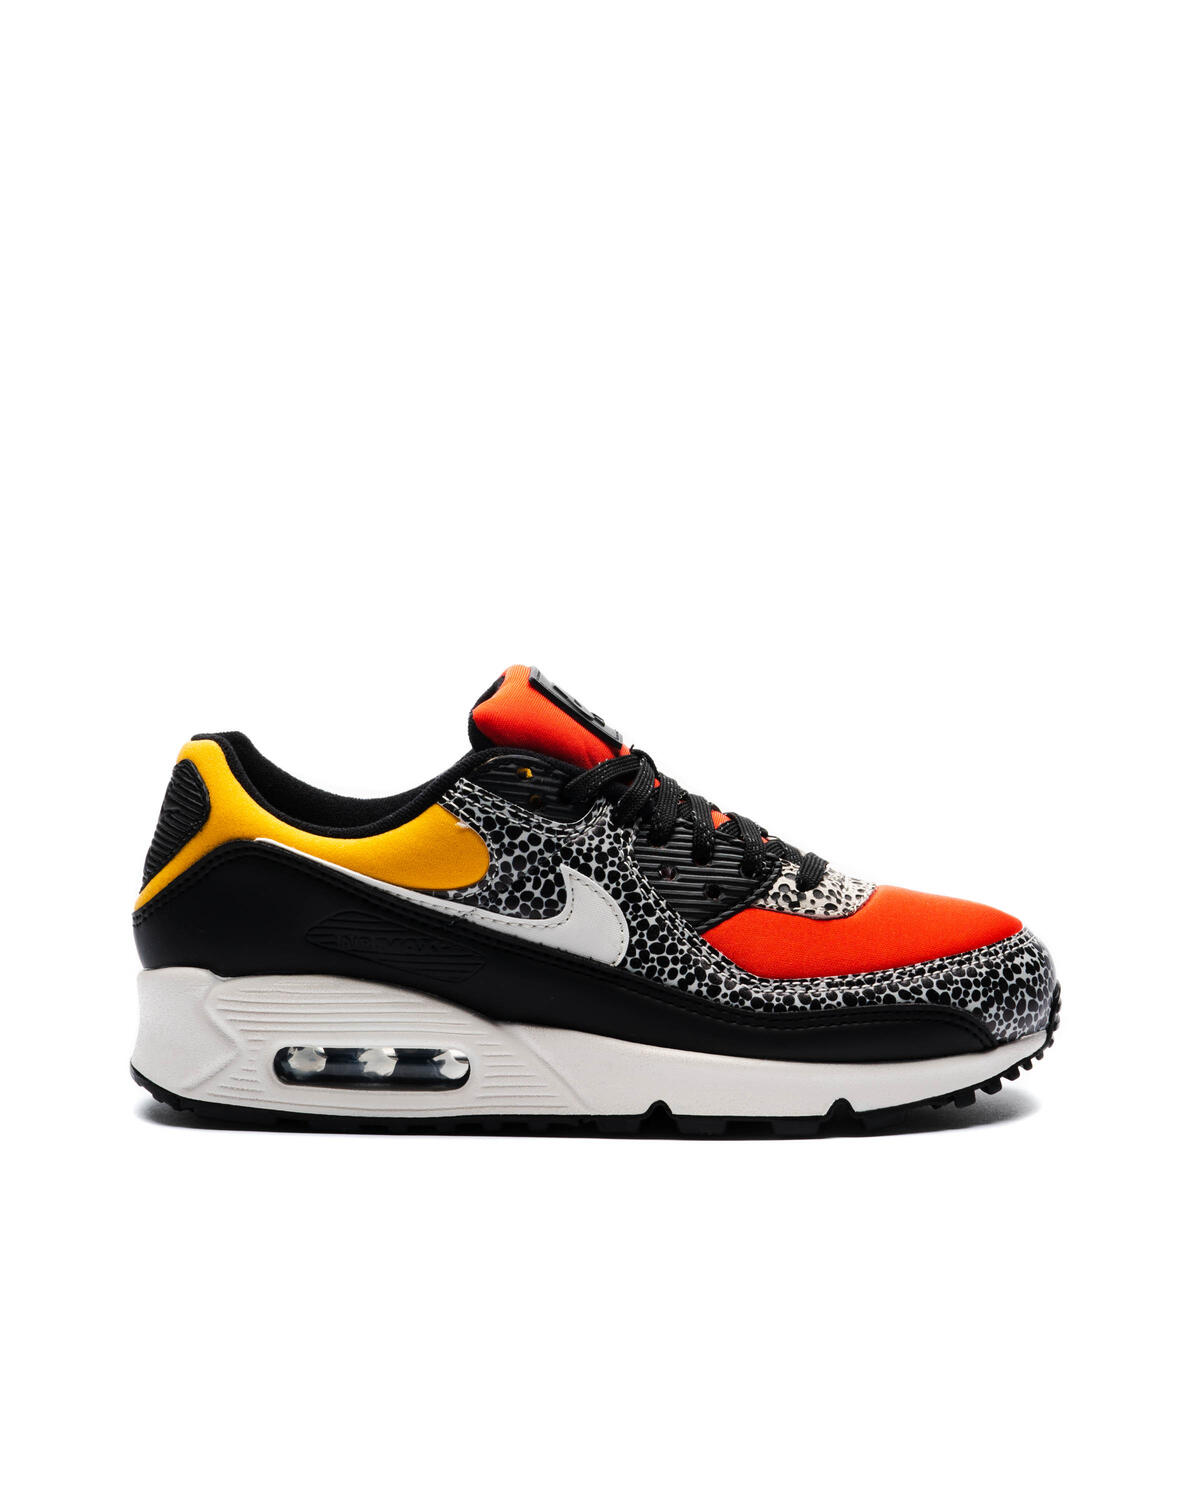 Embankment Infidelity Conflict 001 | Nike WMNS AIR MAX 90 SE "SAFARI" - IetpShops STORE | DC9446 | black  and yellow nike hyperfuse shoes price guide